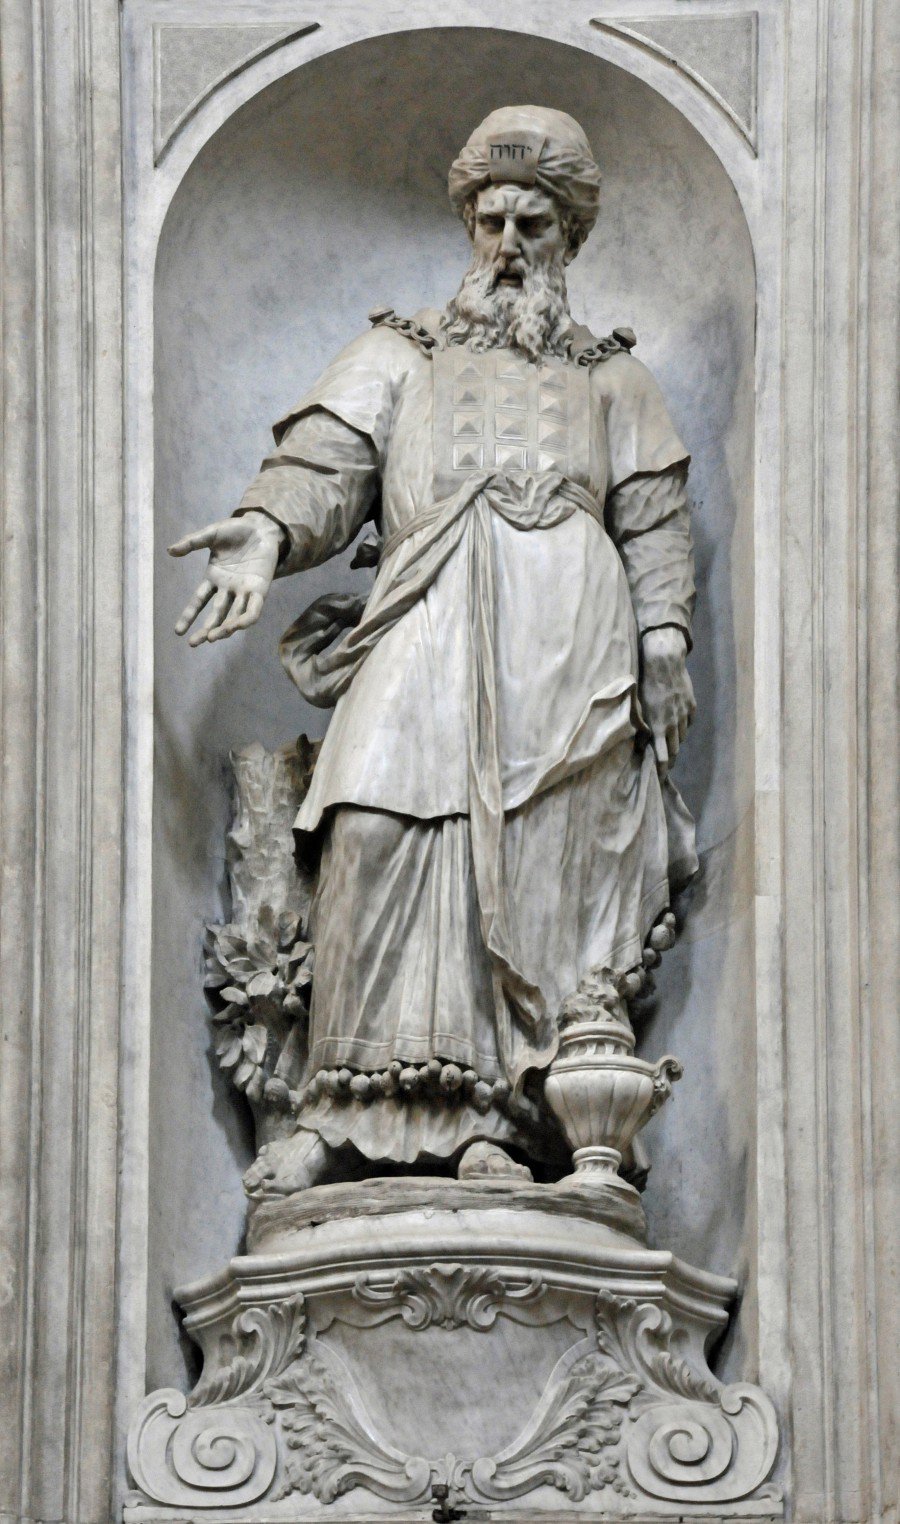 A statue depicting Aaron wearing breastplate. Image source: www.gemsociety.org